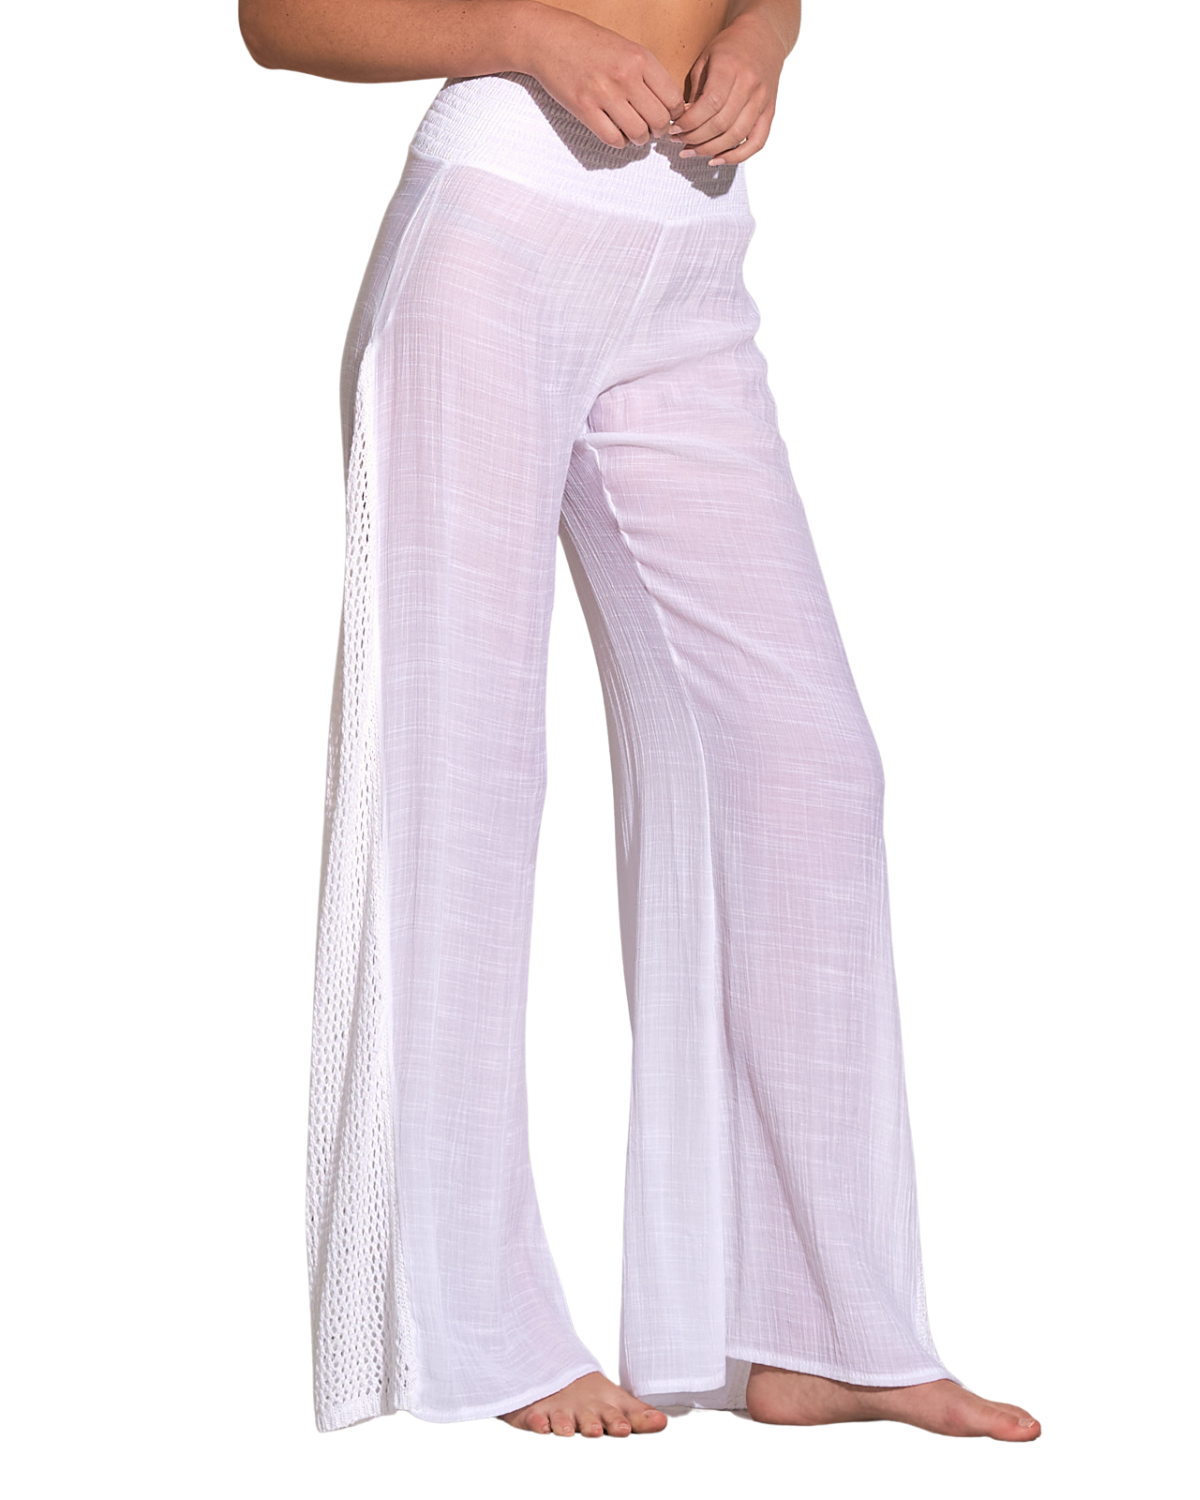 Model wearing a cover up pant with crochet side detail in white